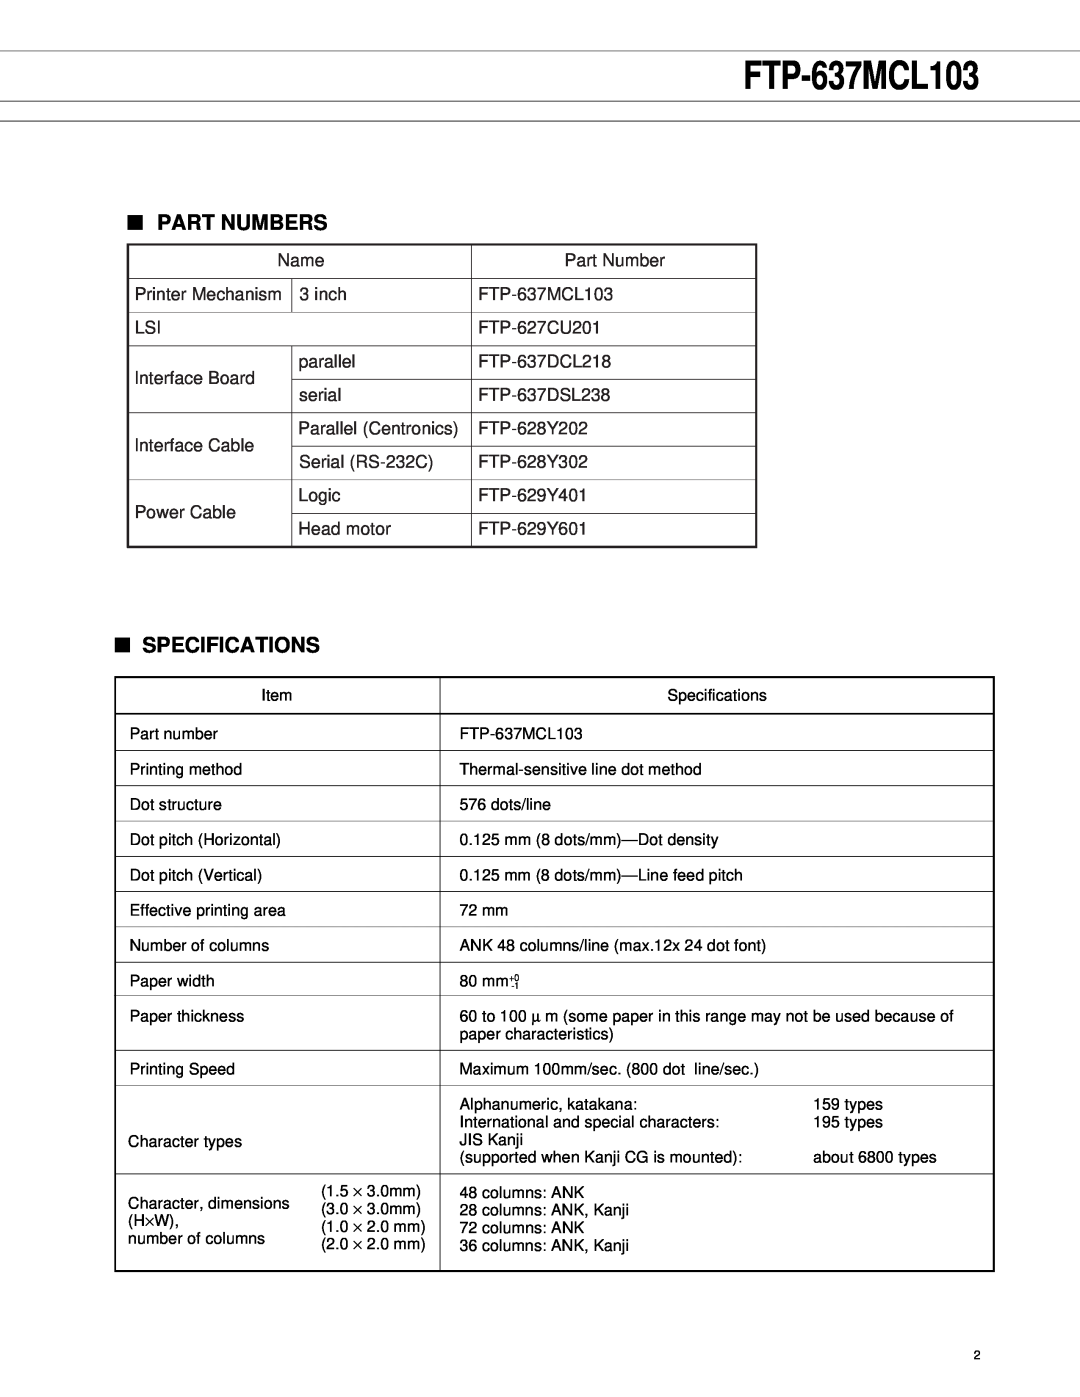 Fujitsu FTP-607 manual FTP-637MCL103, Part Numbers, Specifications 